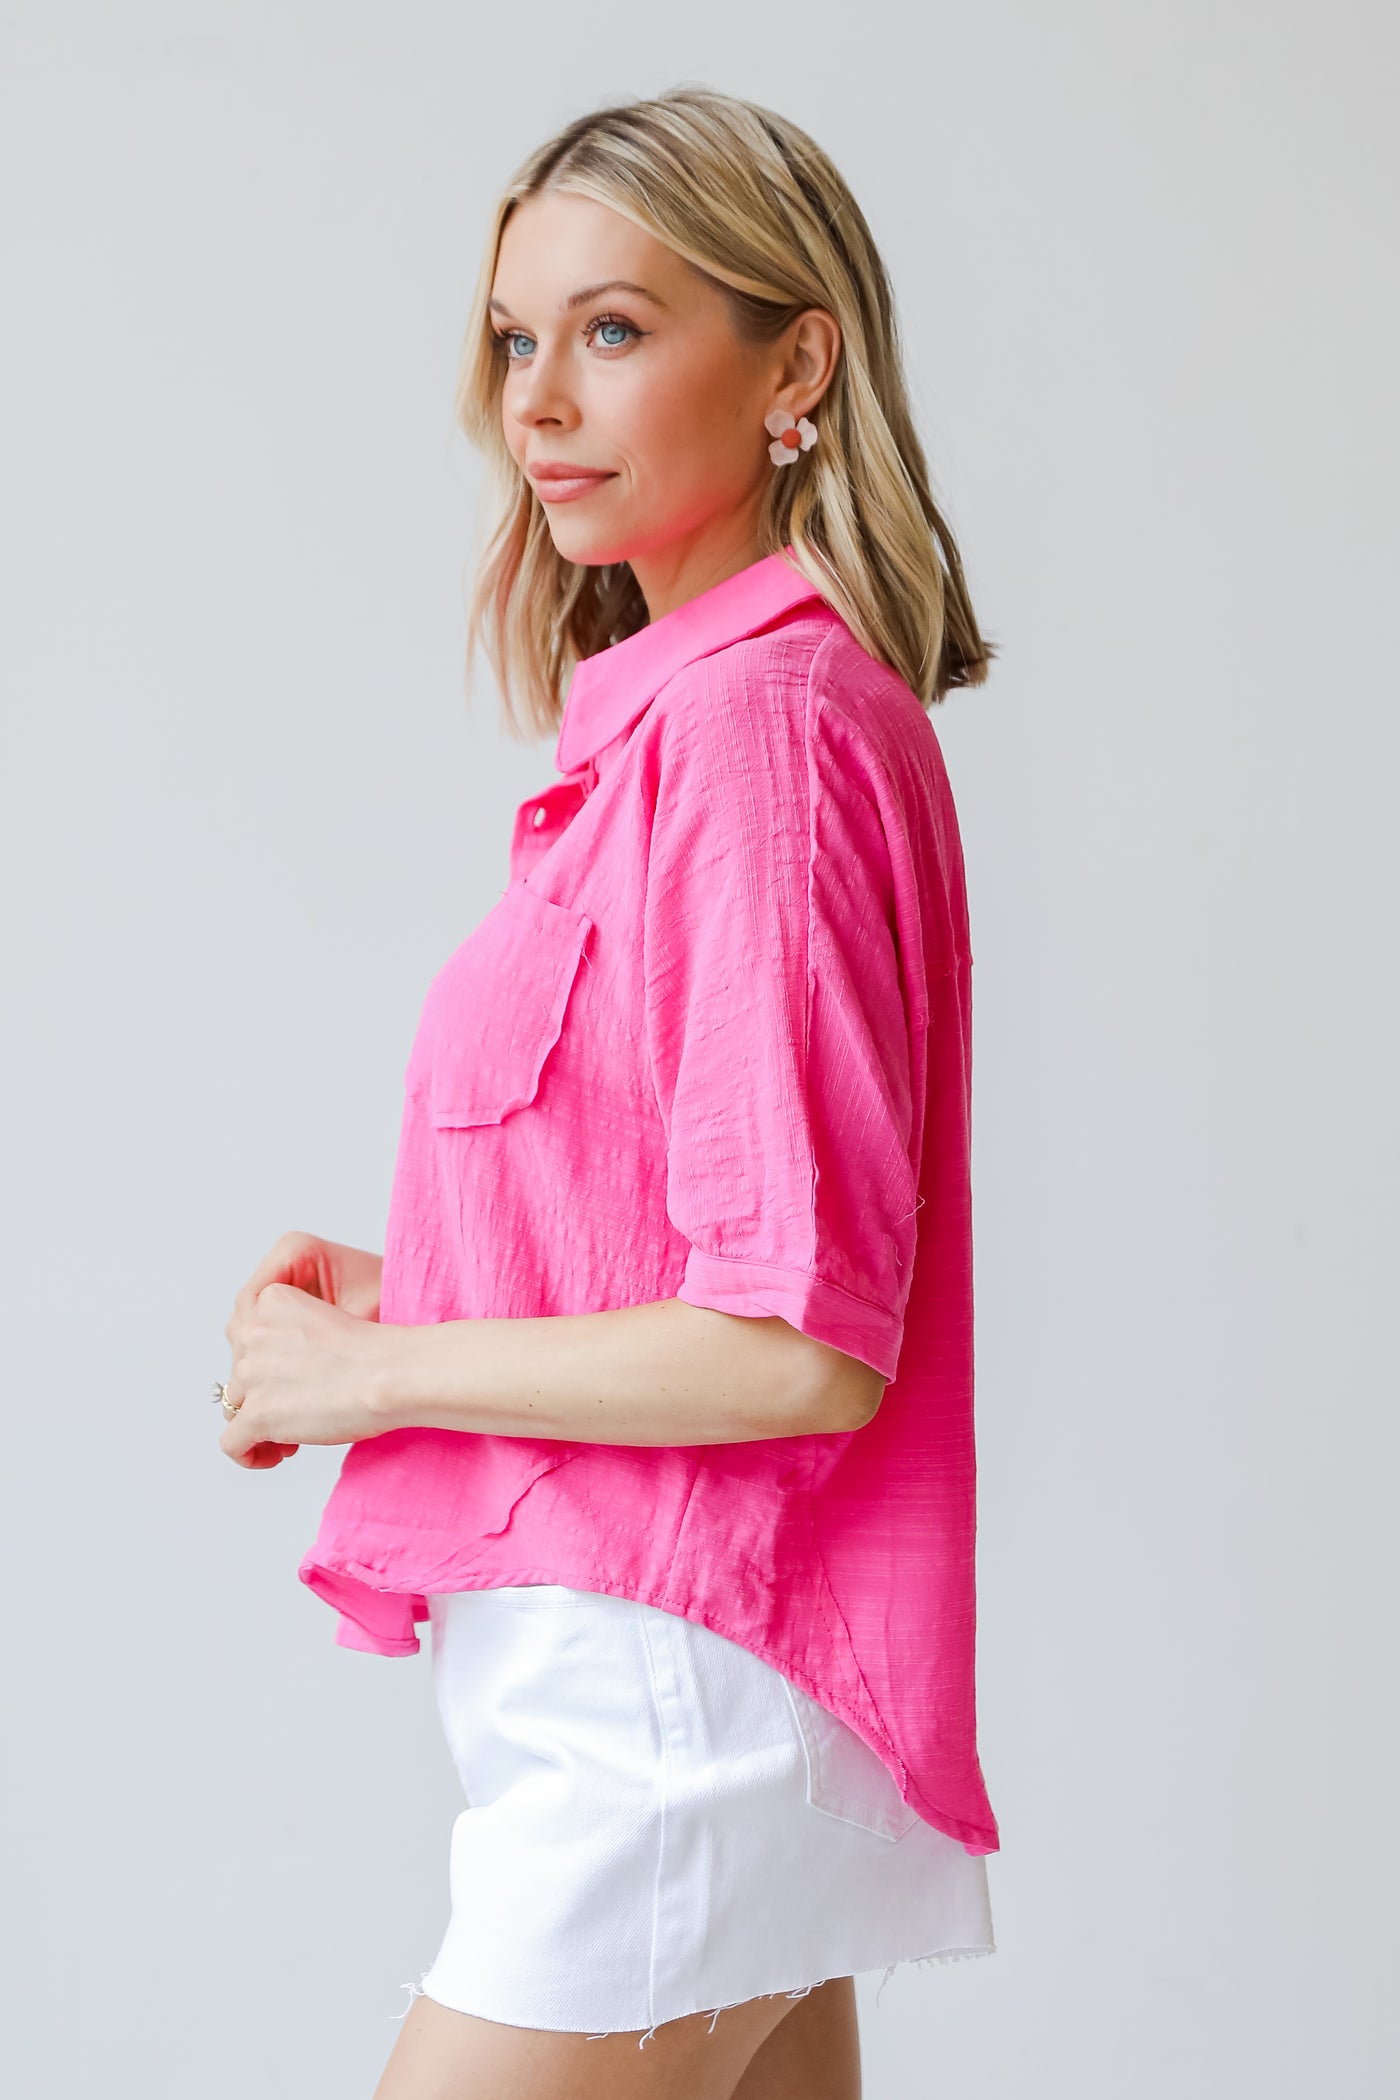 pink Blouse side view